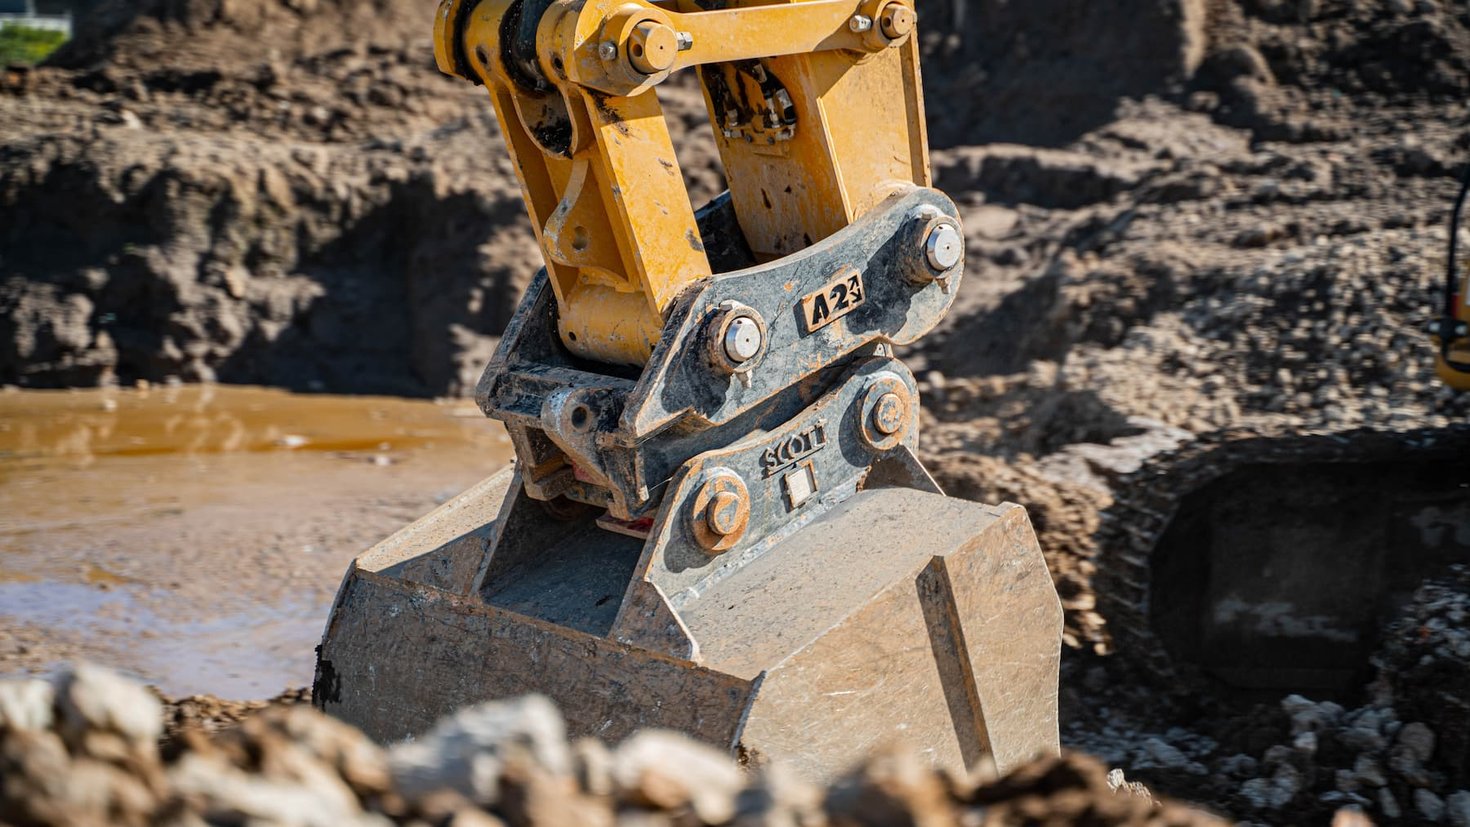 Excavators digging through mud using an Attach2 Sure-Grip hitch with GP bucket